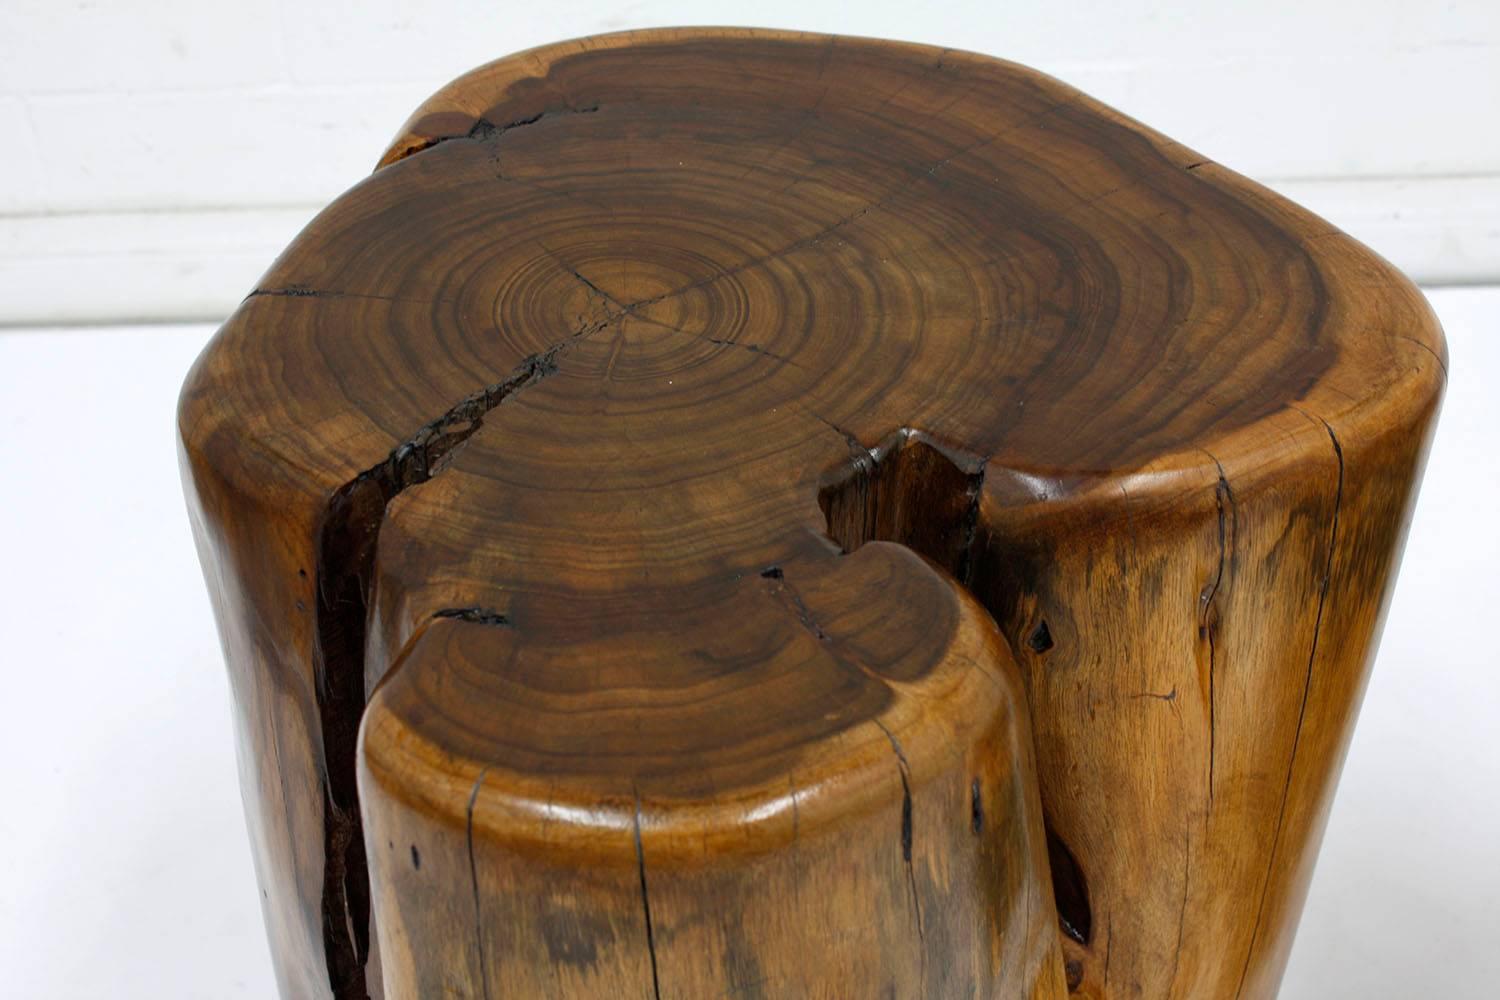 20th Century Pair of Organic Free-Form Wood Stump Side Tables or Stools